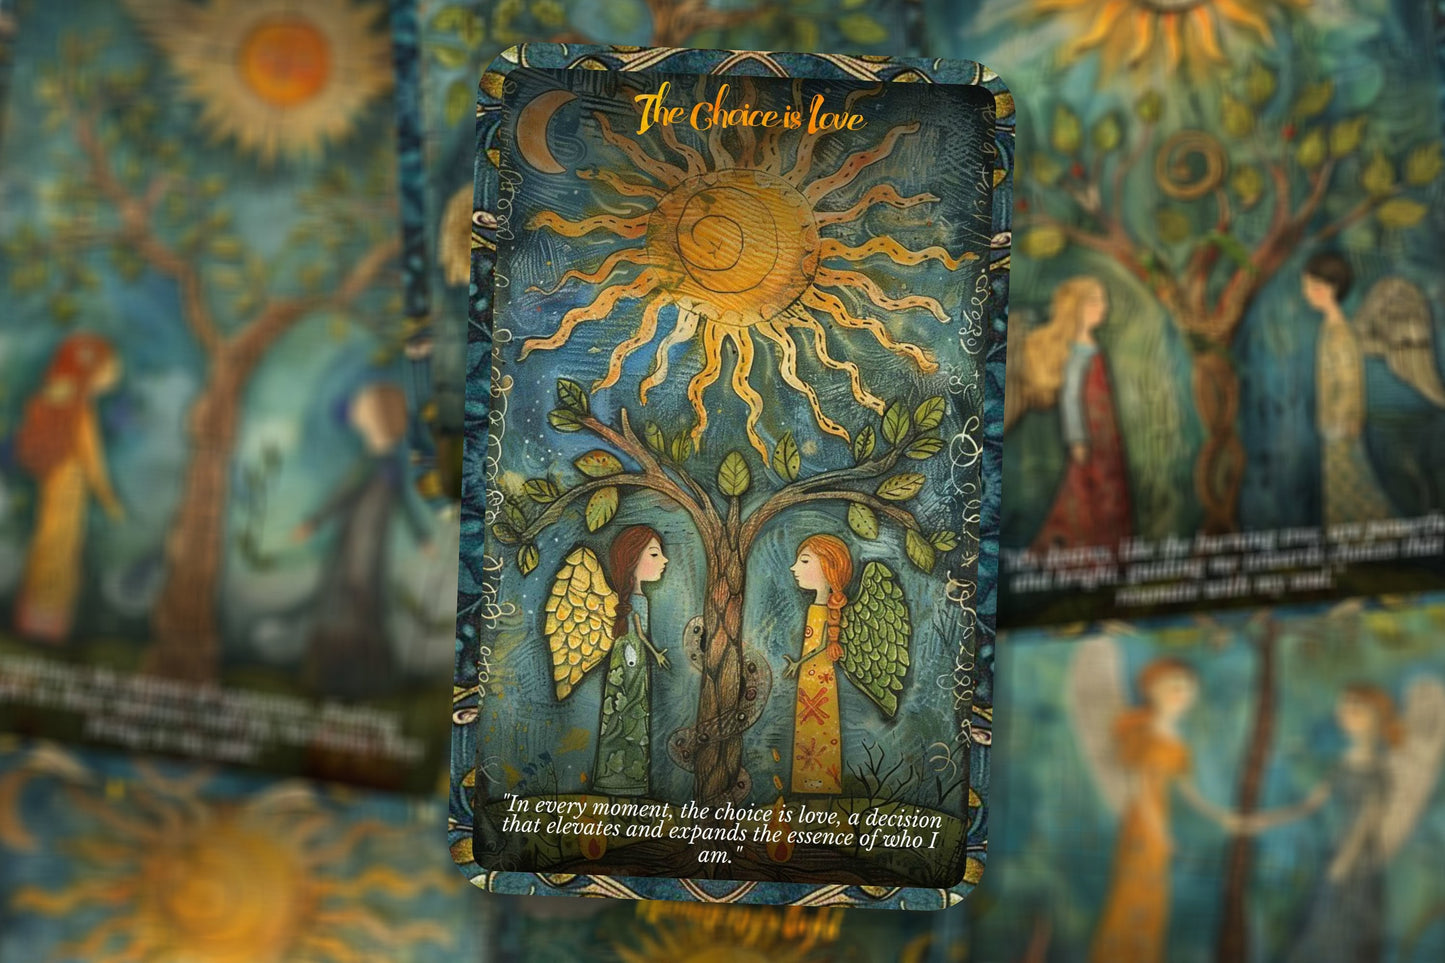 Affirmation Cards - The Alchemy of Love - Transforming Choices into Wisdom